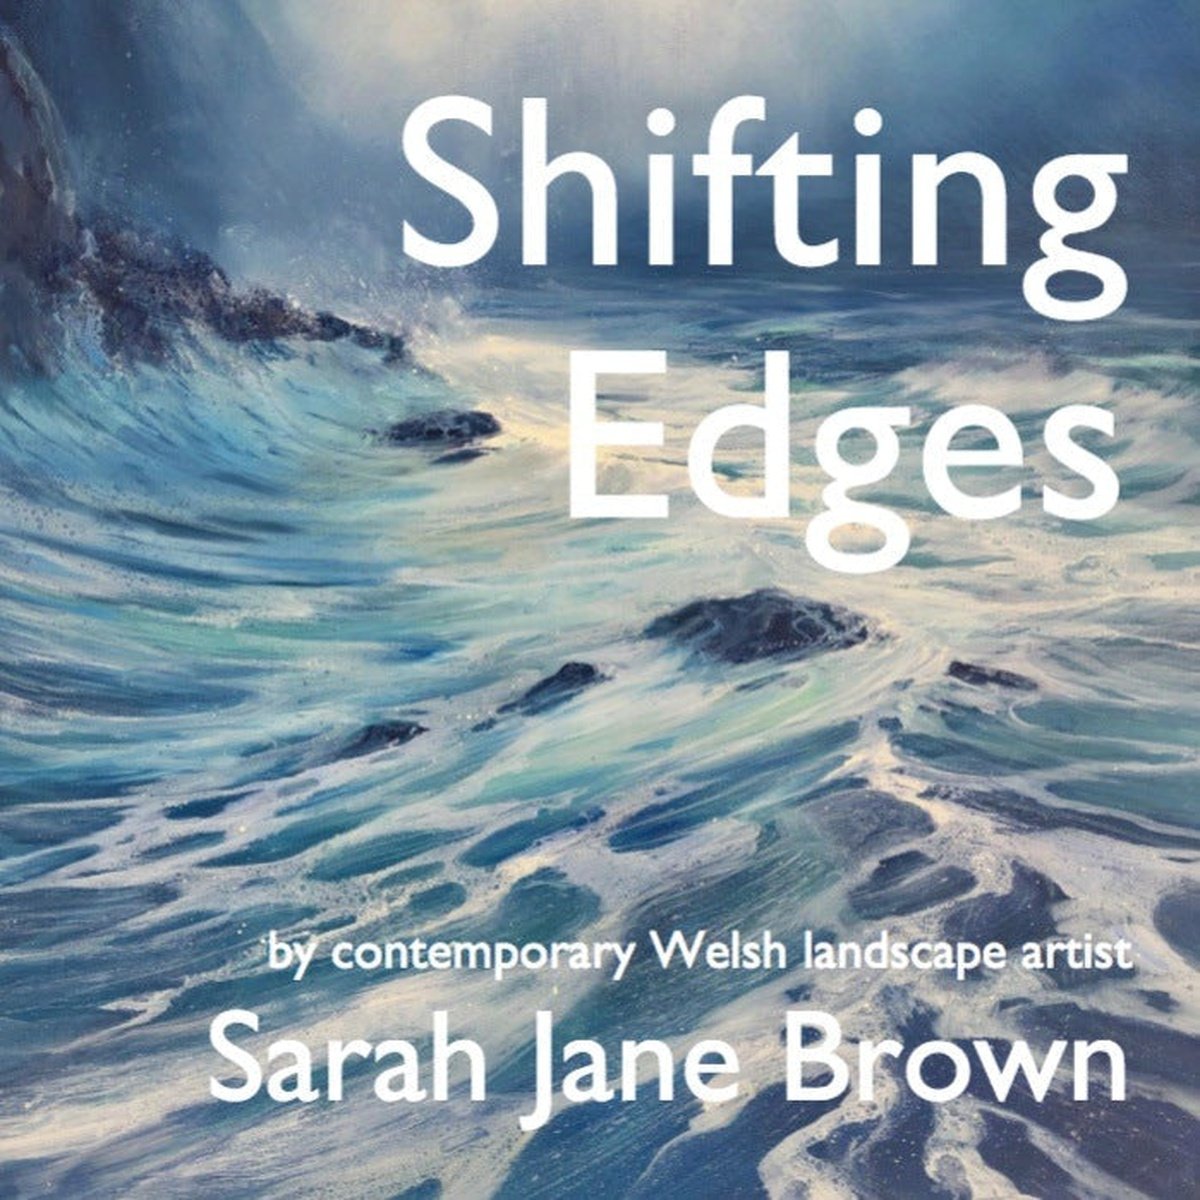 Shifting Edges exhibition catalogue now available to view online